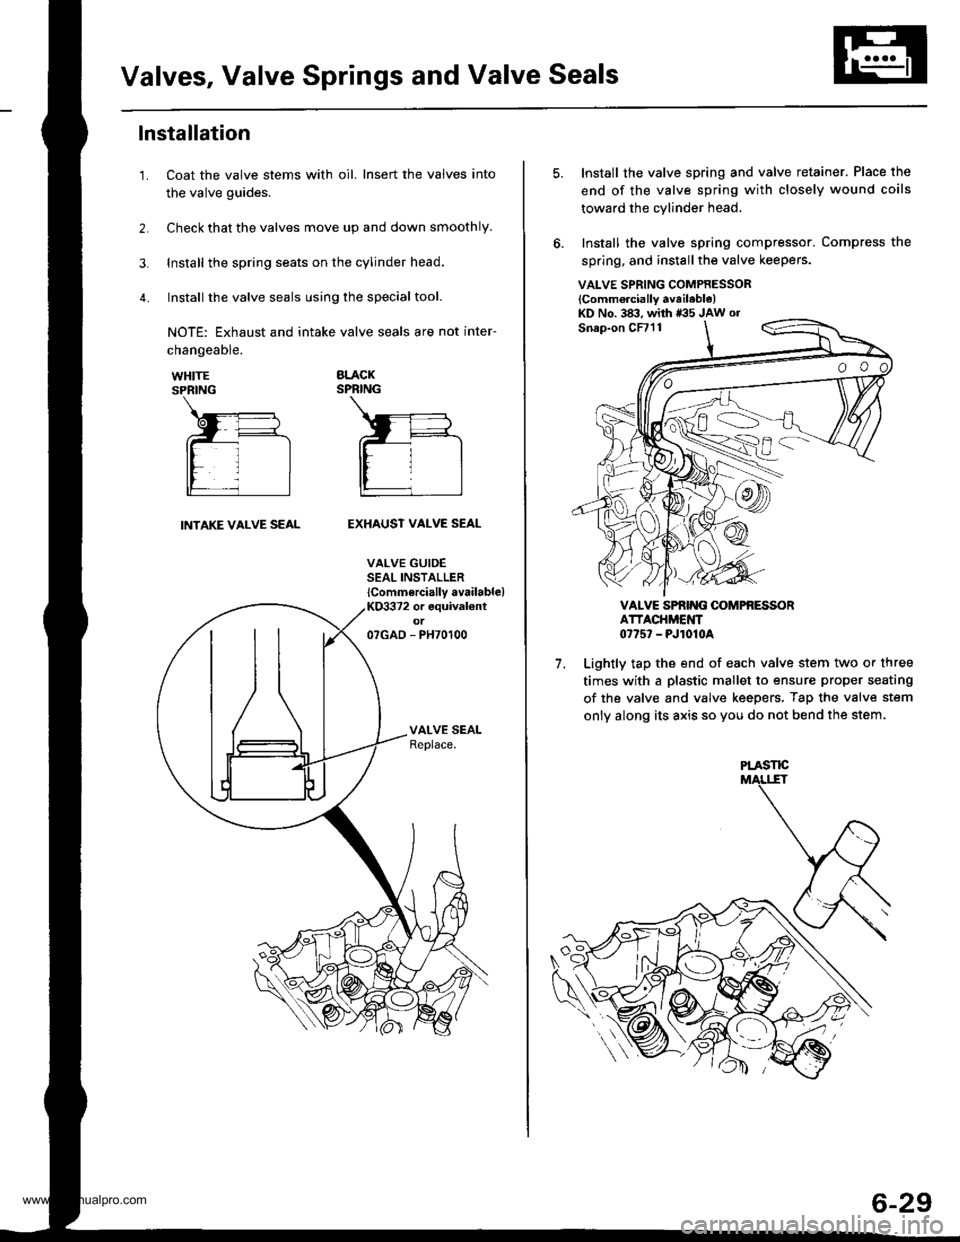 HONDA CR-V 1997 RD1-RD3 / 1.G Workshop Manual 
Valves, Valve Springs and Valve Seals
lnstallation
Coat the valve stems with oil. Insert the valves into
the valve guides.
Check that the valves move up and down smoothly.
Install the spring seats on